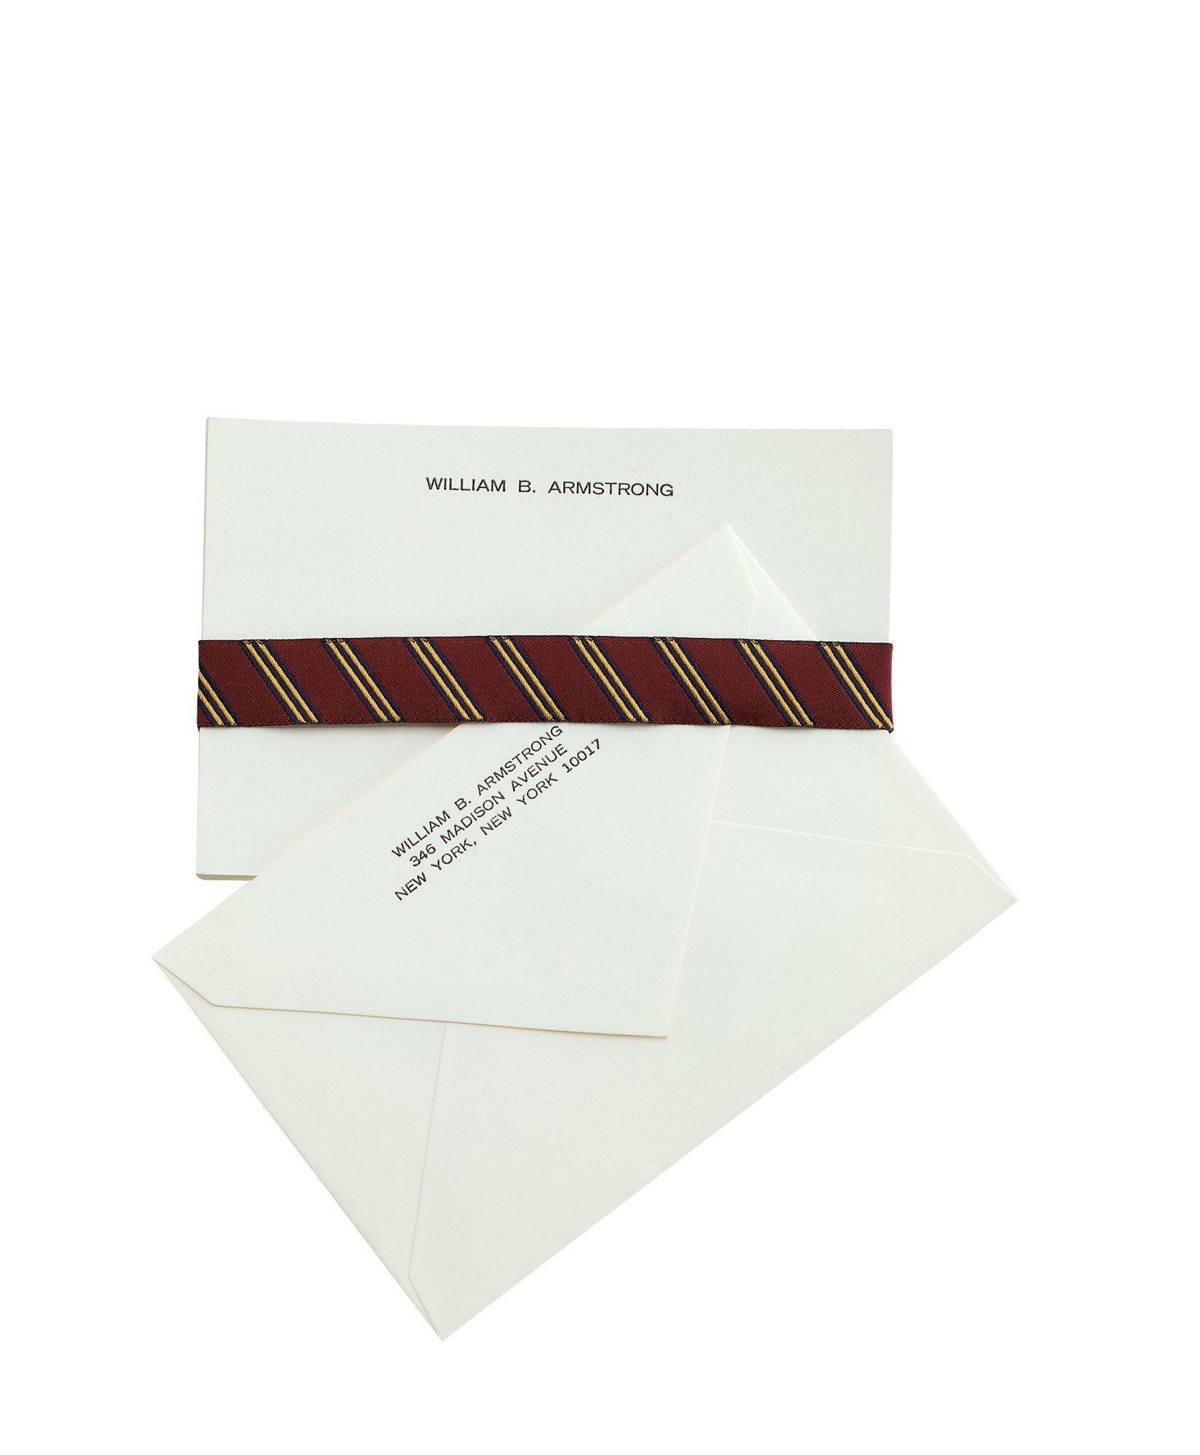 Brooks Brothers Correspondence Cards - 100 Cards & Envelopes Shoes | Ivory